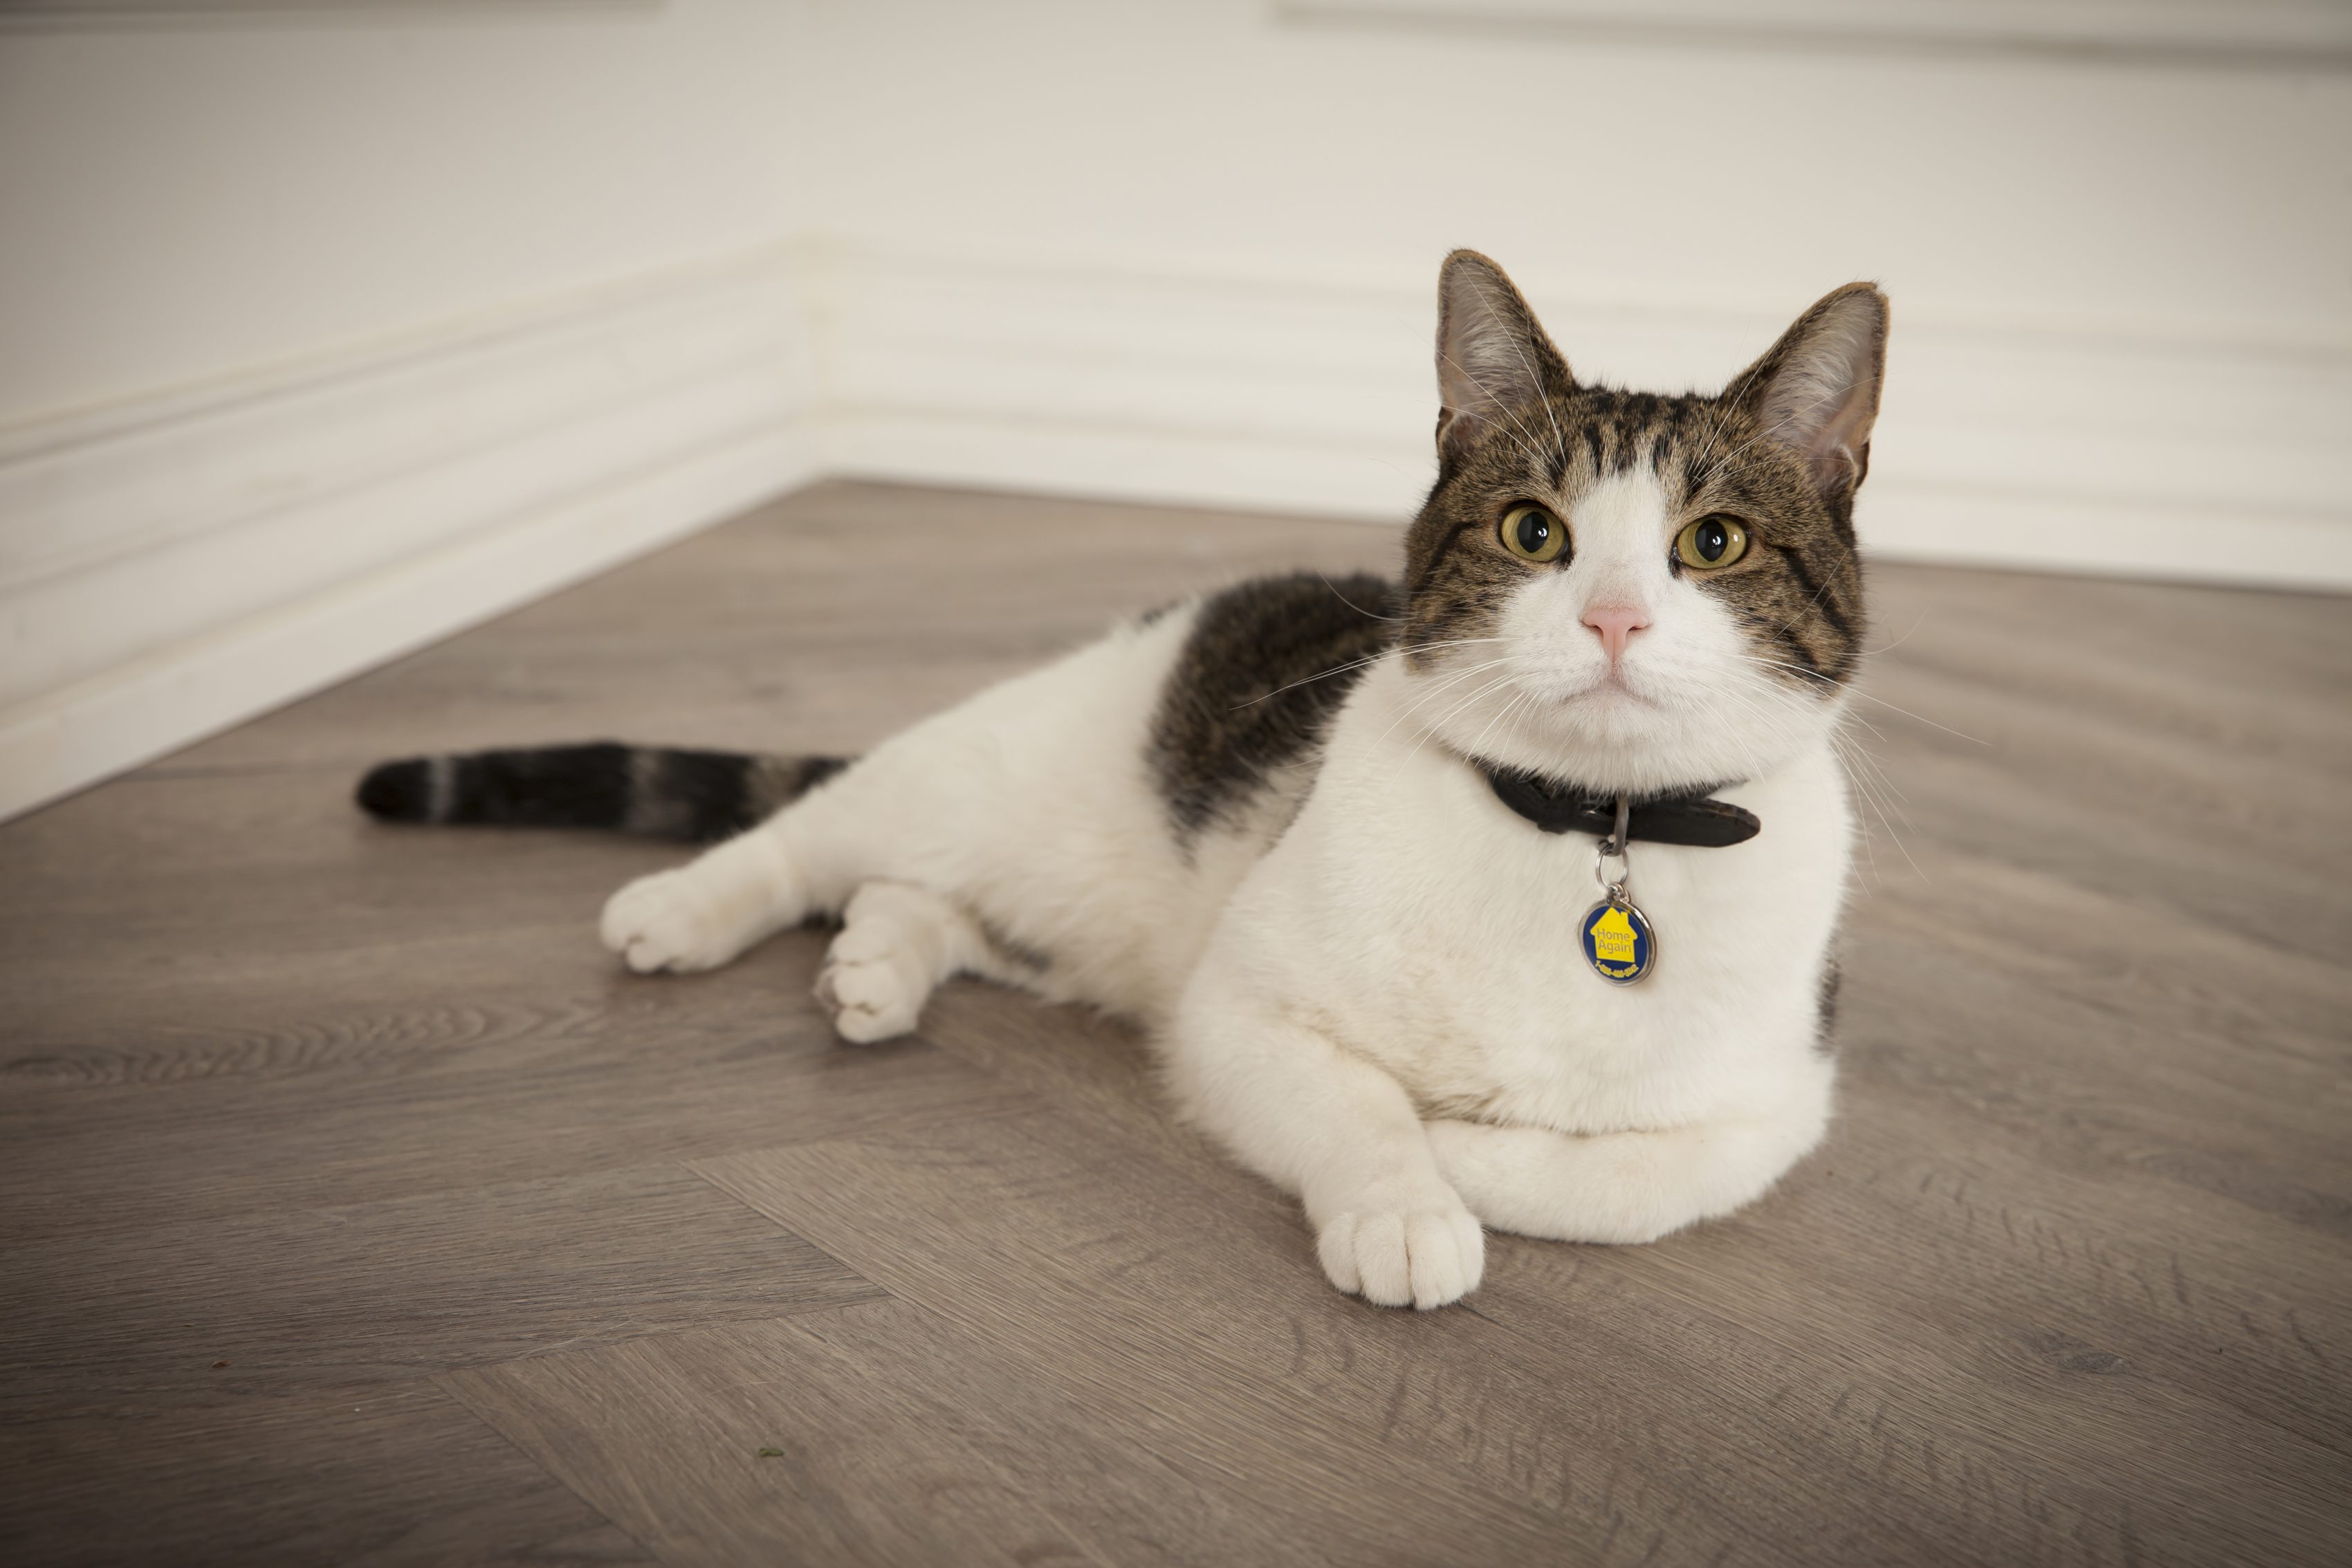 Cat laying down wearing HomeAgain collar.